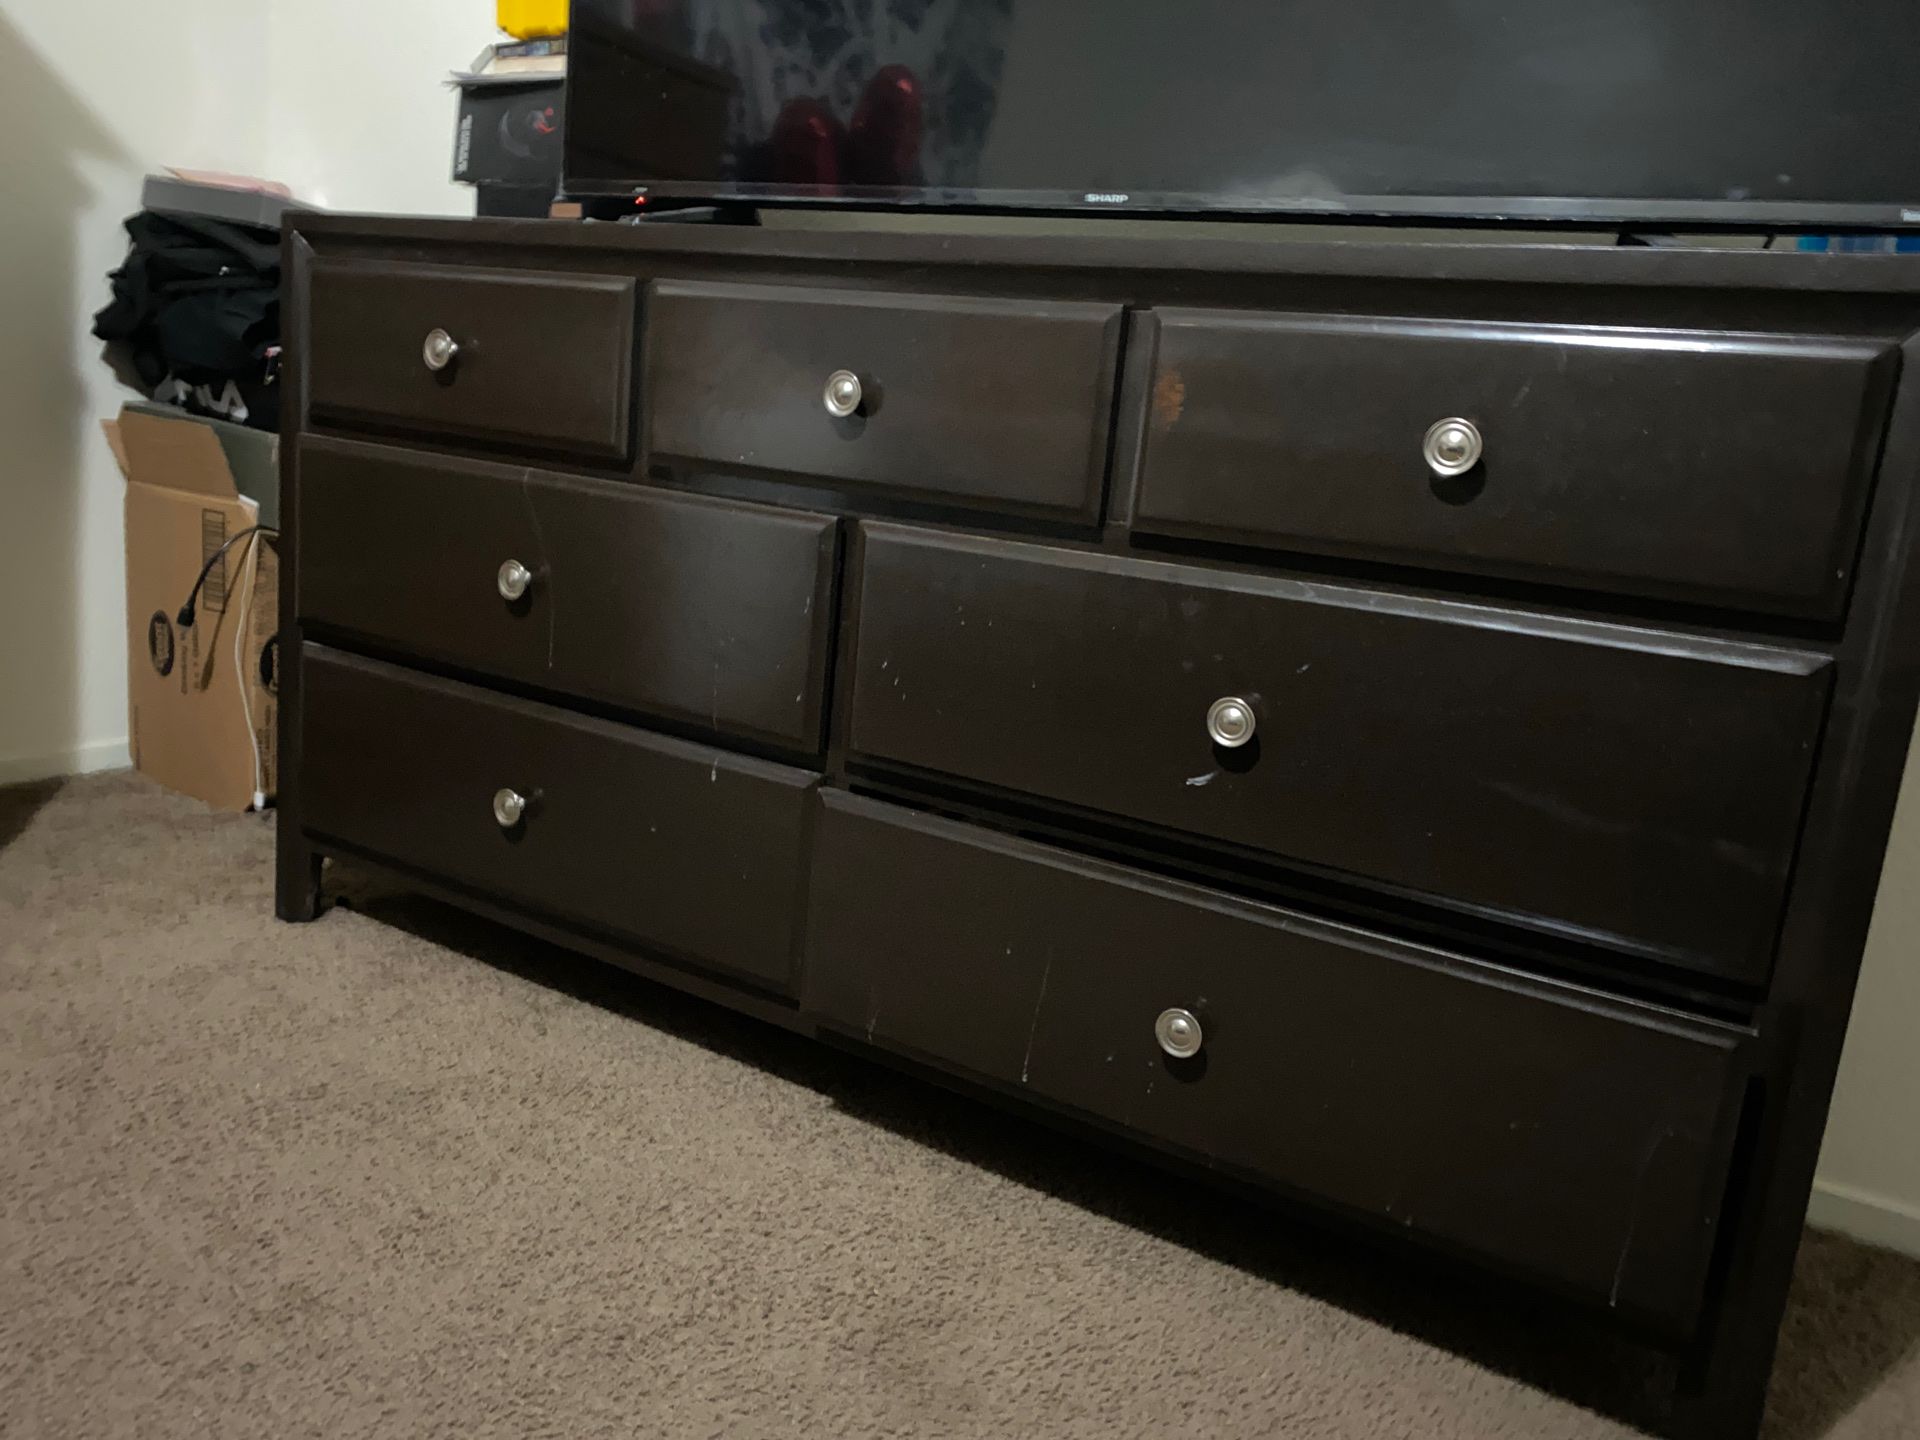 Queen size bed, frame, and dresser